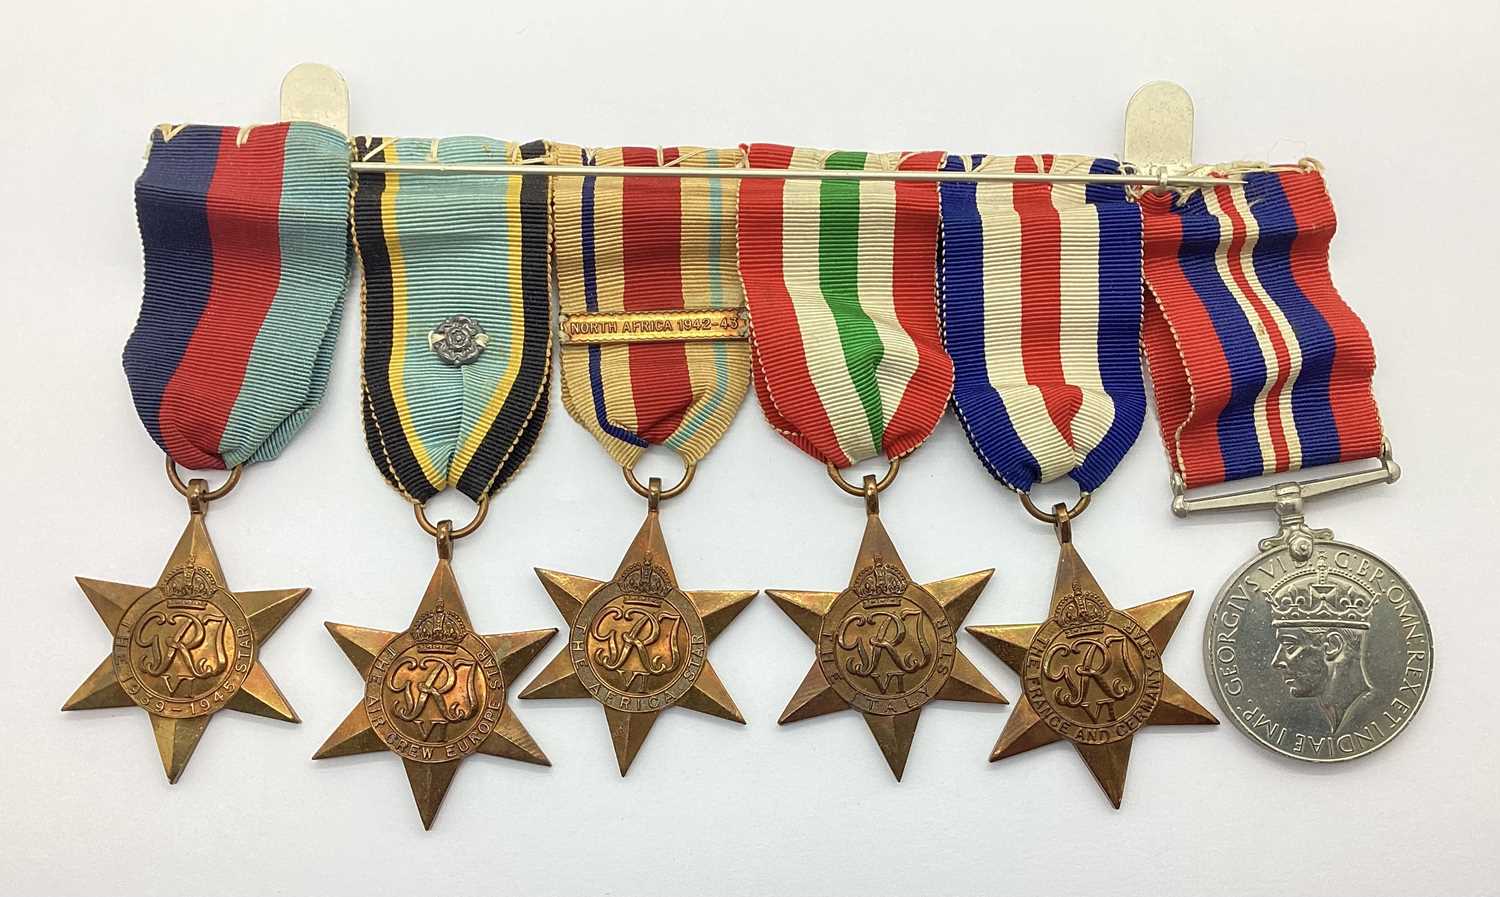 WWII RAF Fighter Command Air Crew Europe Star Medal and Log Book Grouping, plus cloth insignia, - Image 7 of 7